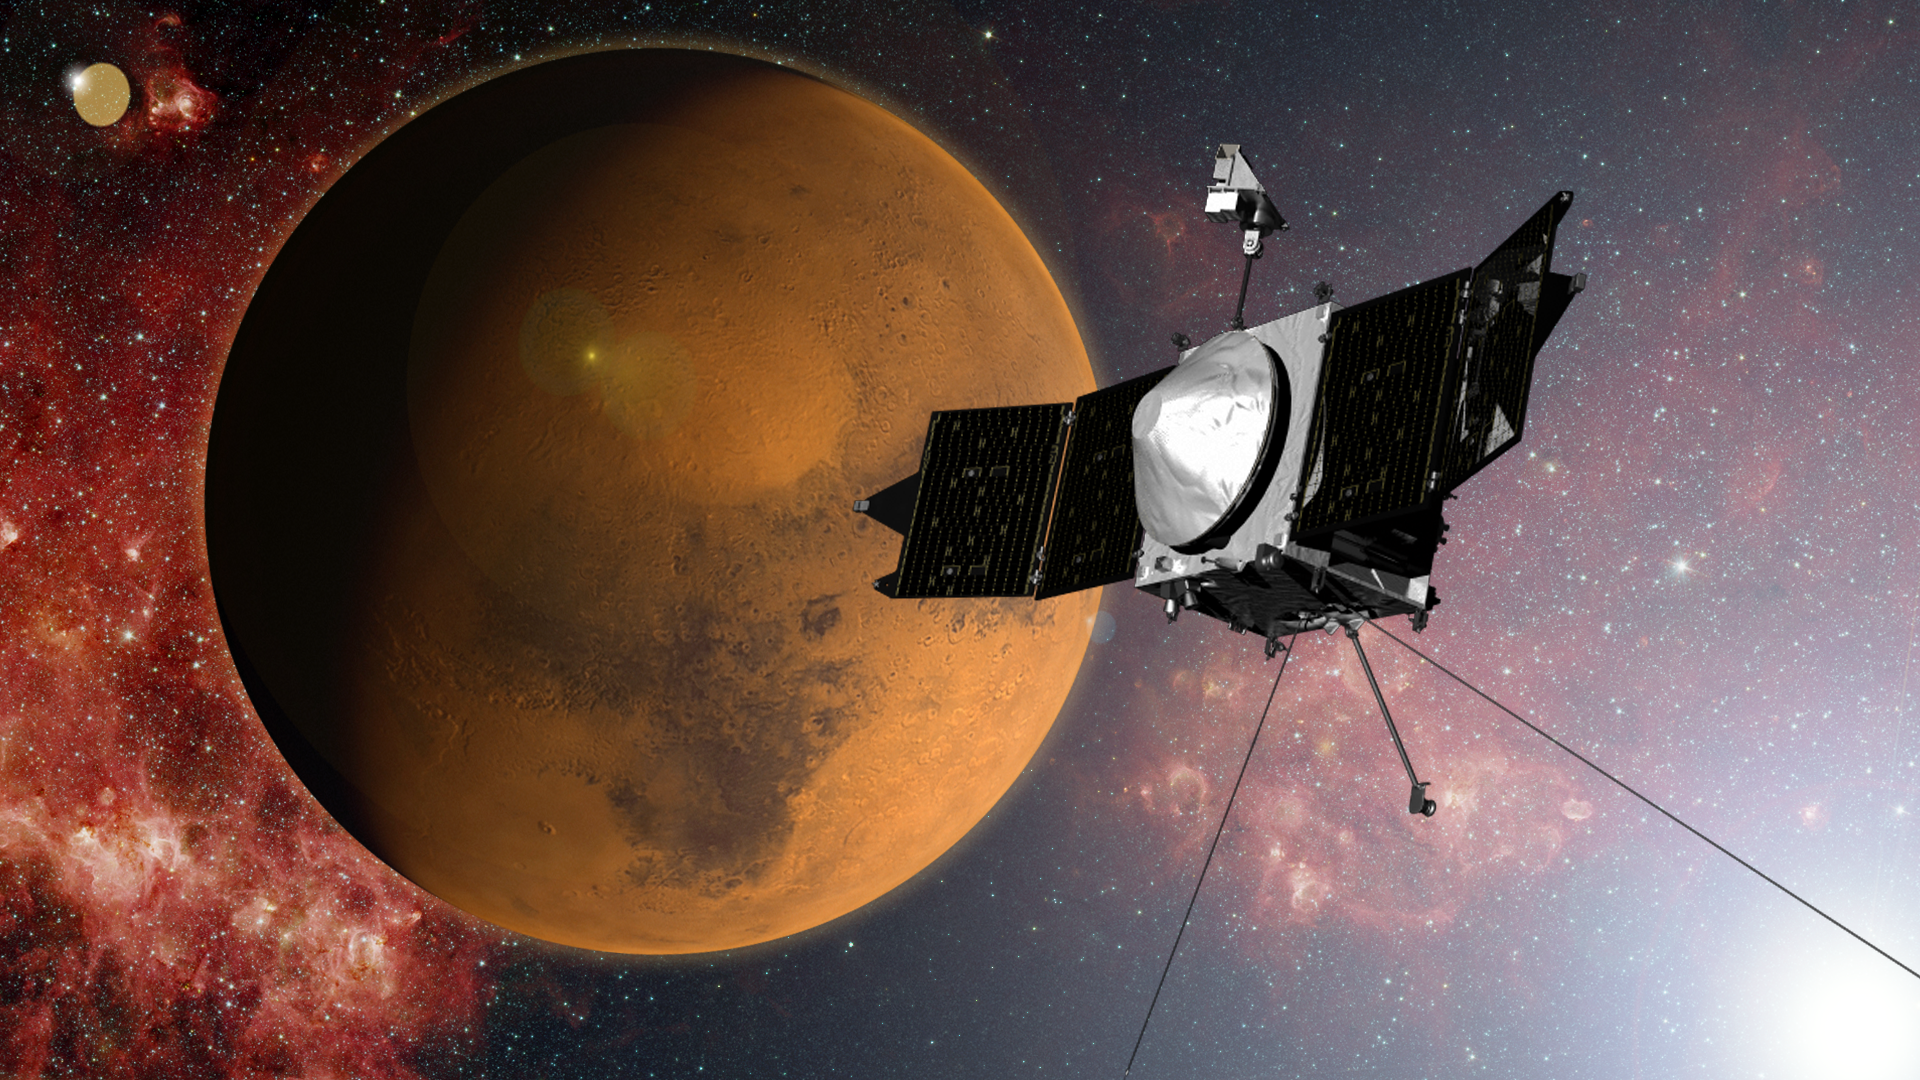 NASA's MAVEN spacecraft is quickly approaching Mars on a mission to study its upper atmosphere. When it arrives on September 21, 2014, MAVEN's winding journey from Earth will culminate with a dramatic engine burn, pulling the spacecraft into an elliptical orbit. For complete transcript, click here.Watch this video on the NASAexplorer YouTube channel.